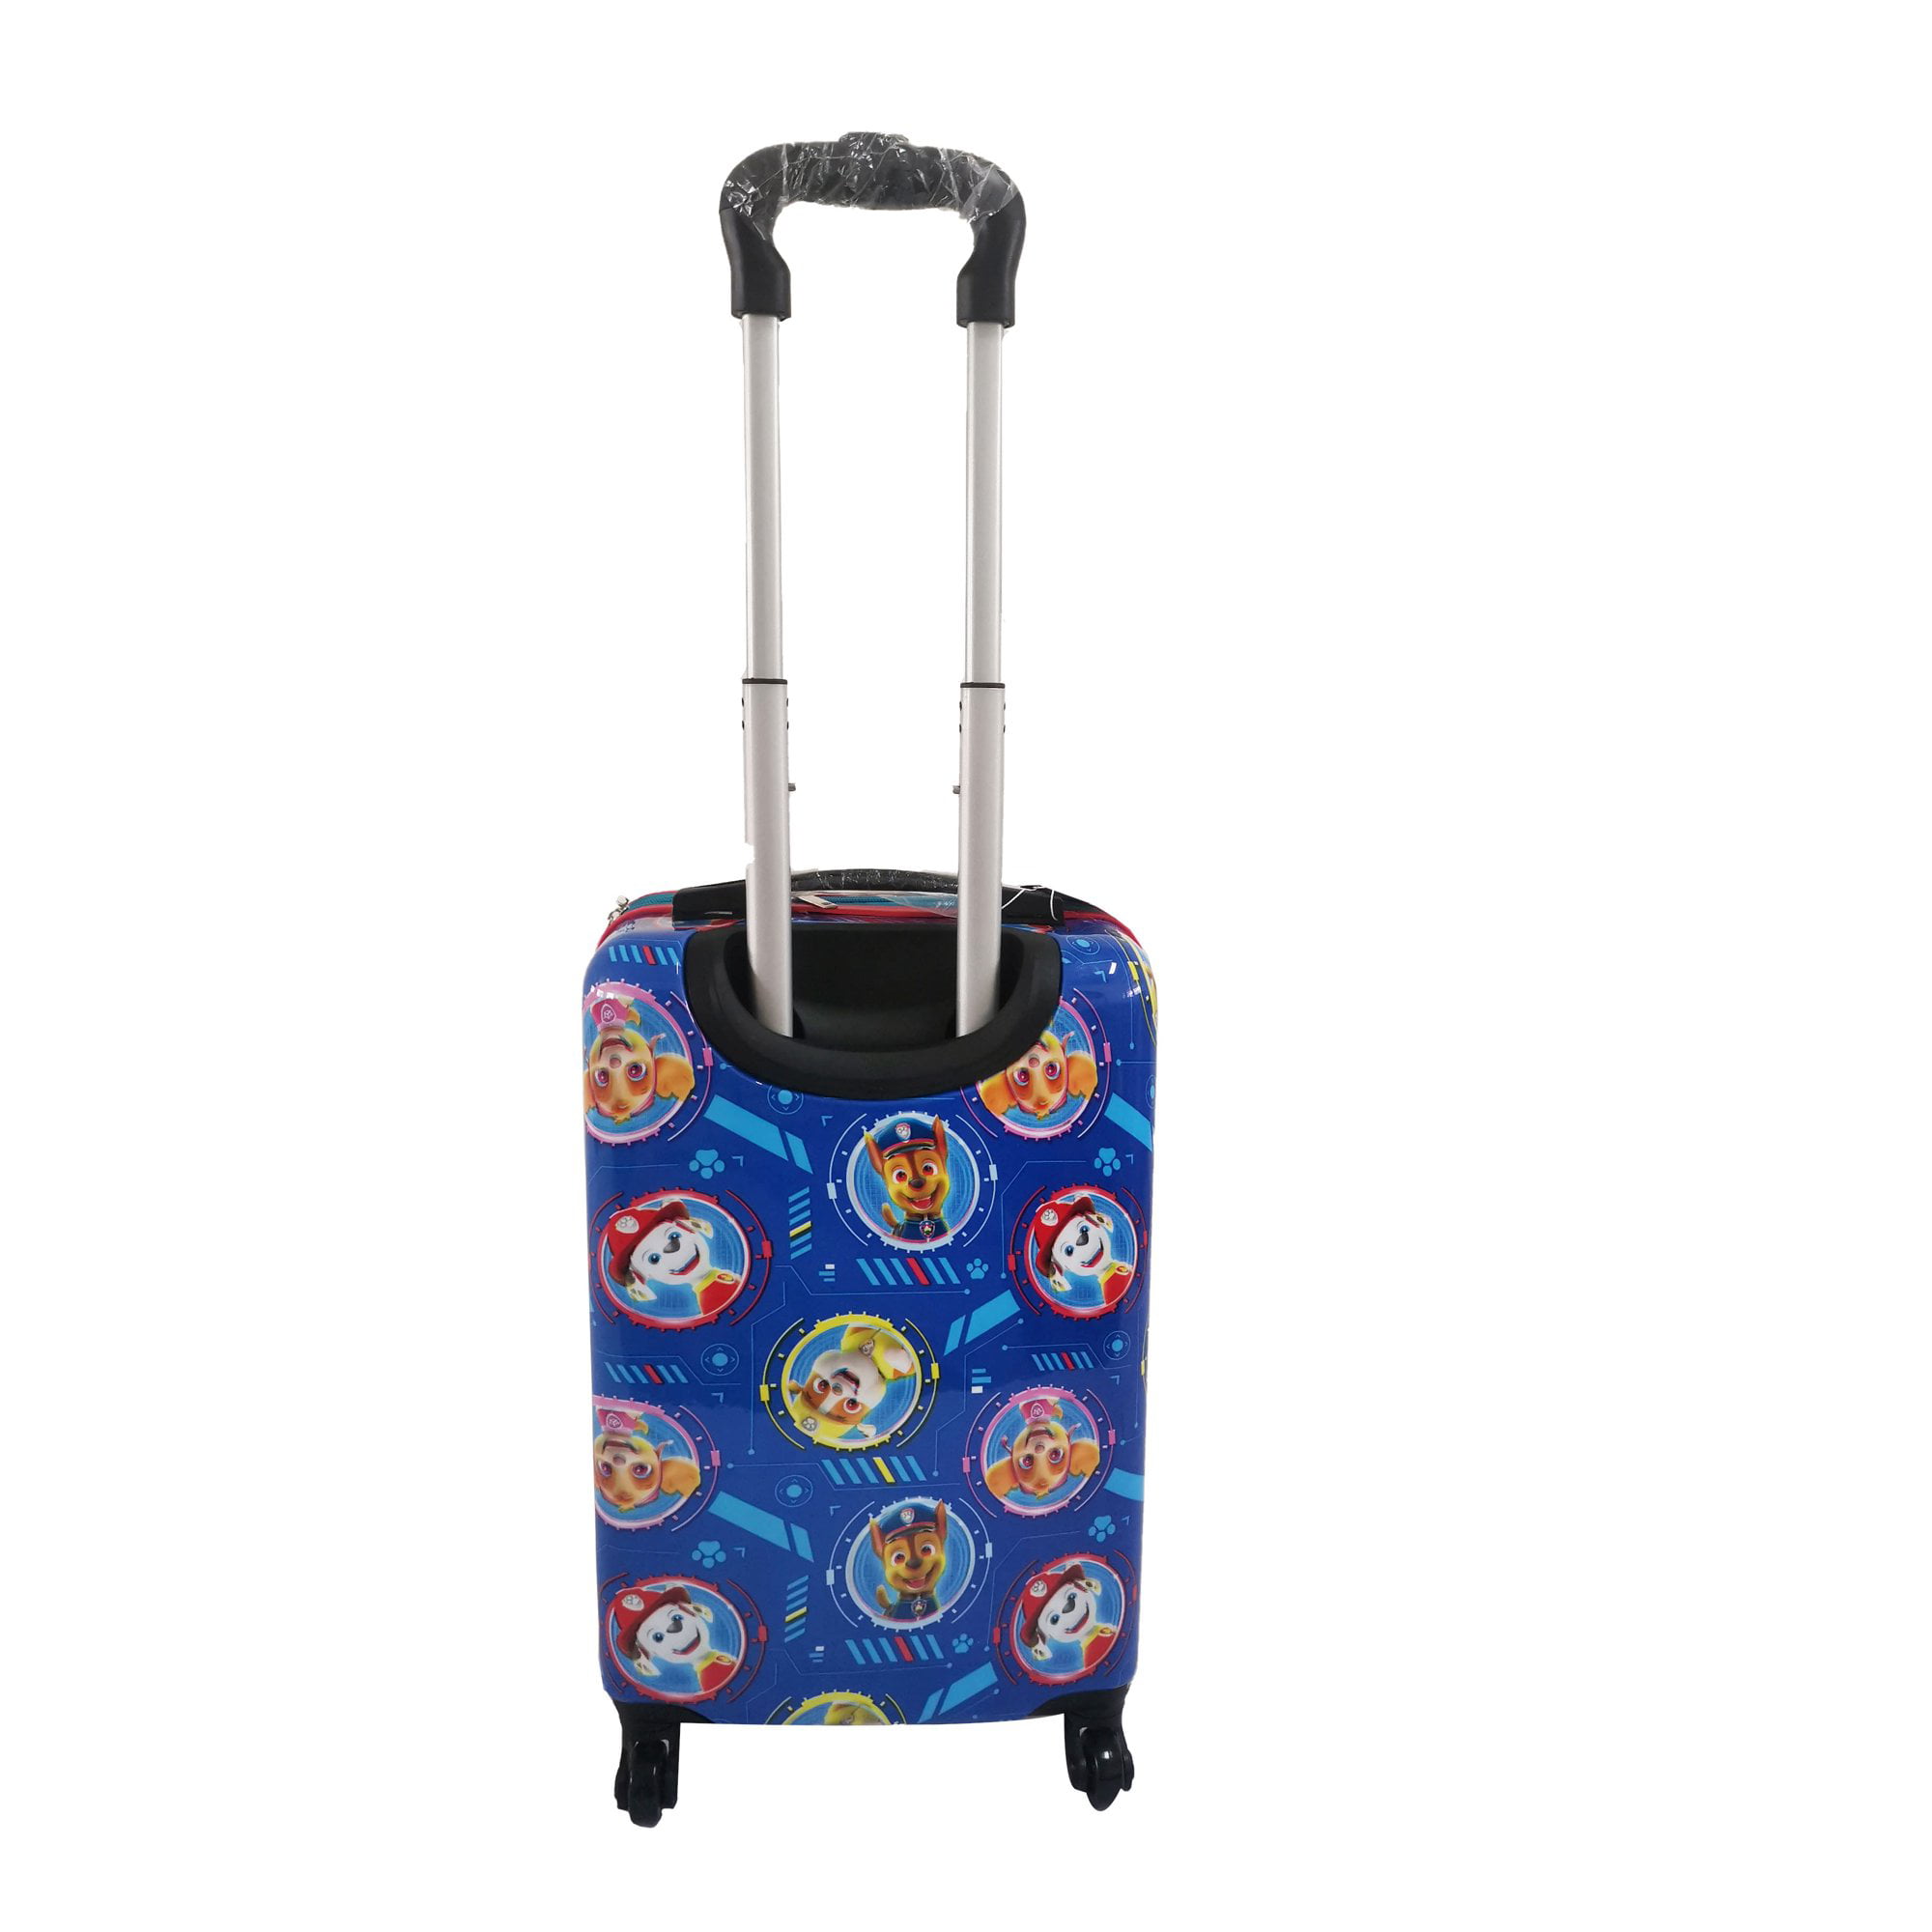 Luggage Inches Kids Travel for Way Rolling Hard-Sided Trolley Spiderman Spinner Carry-On No Home 20 Suitcase Tween